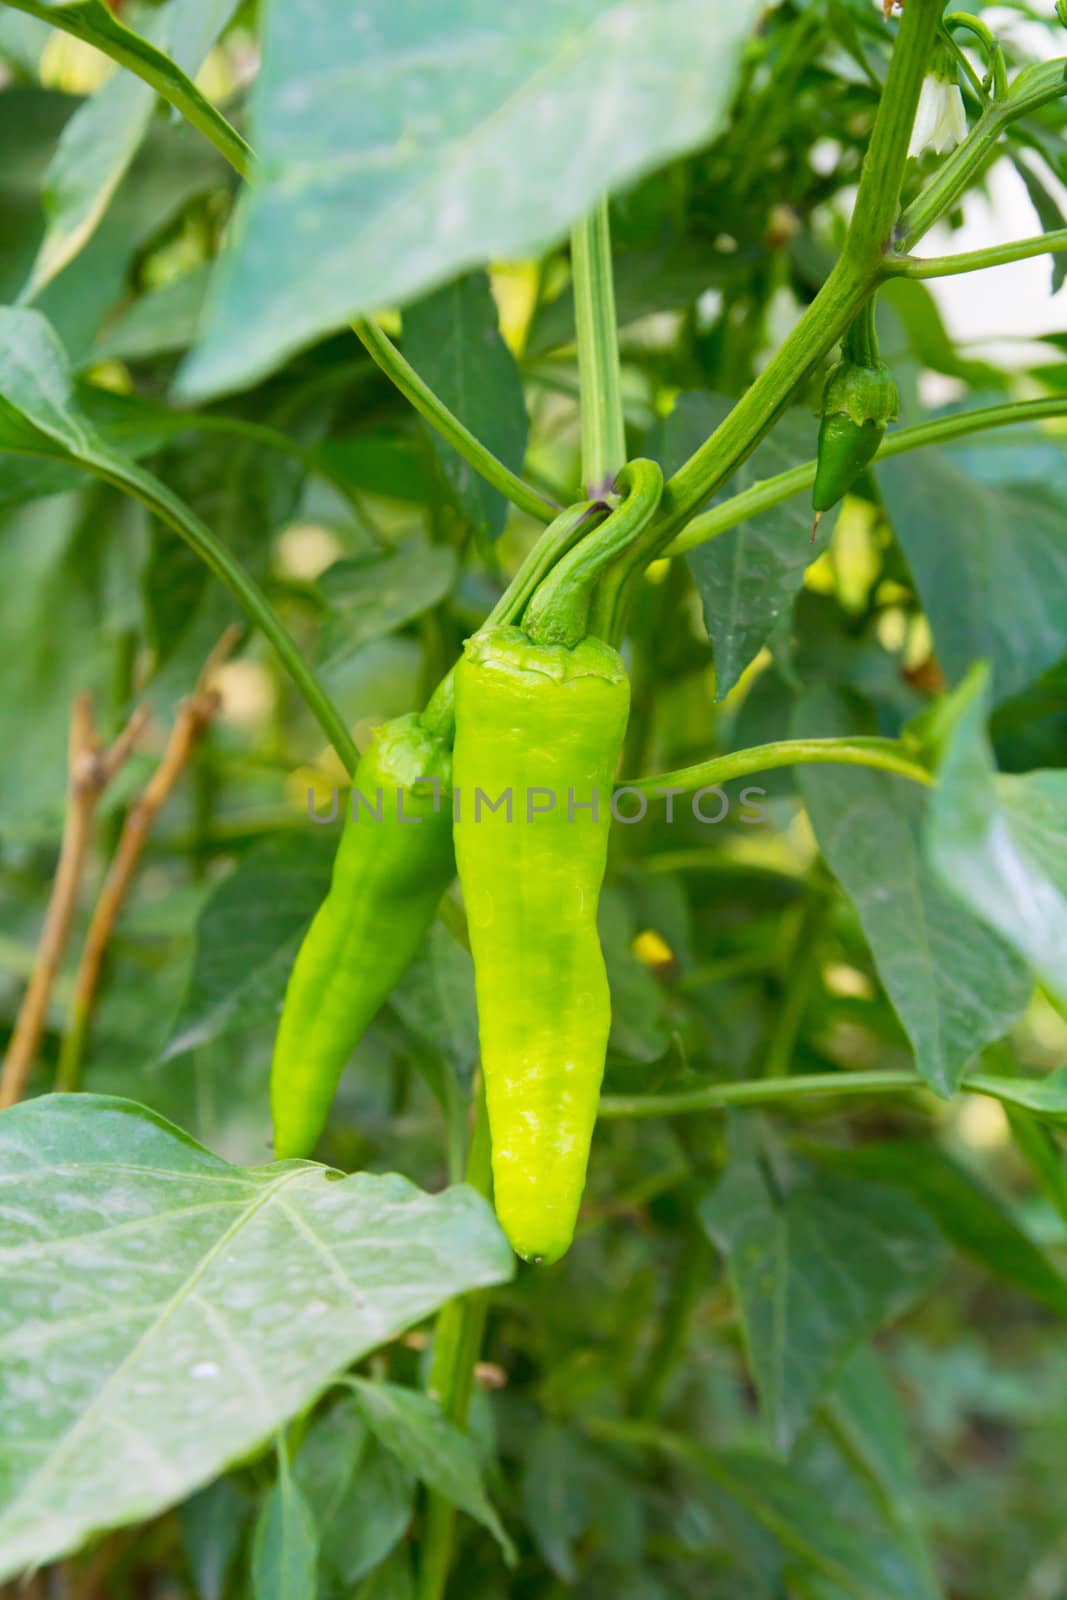 Green hot chili pepper growing on bush with blurred background